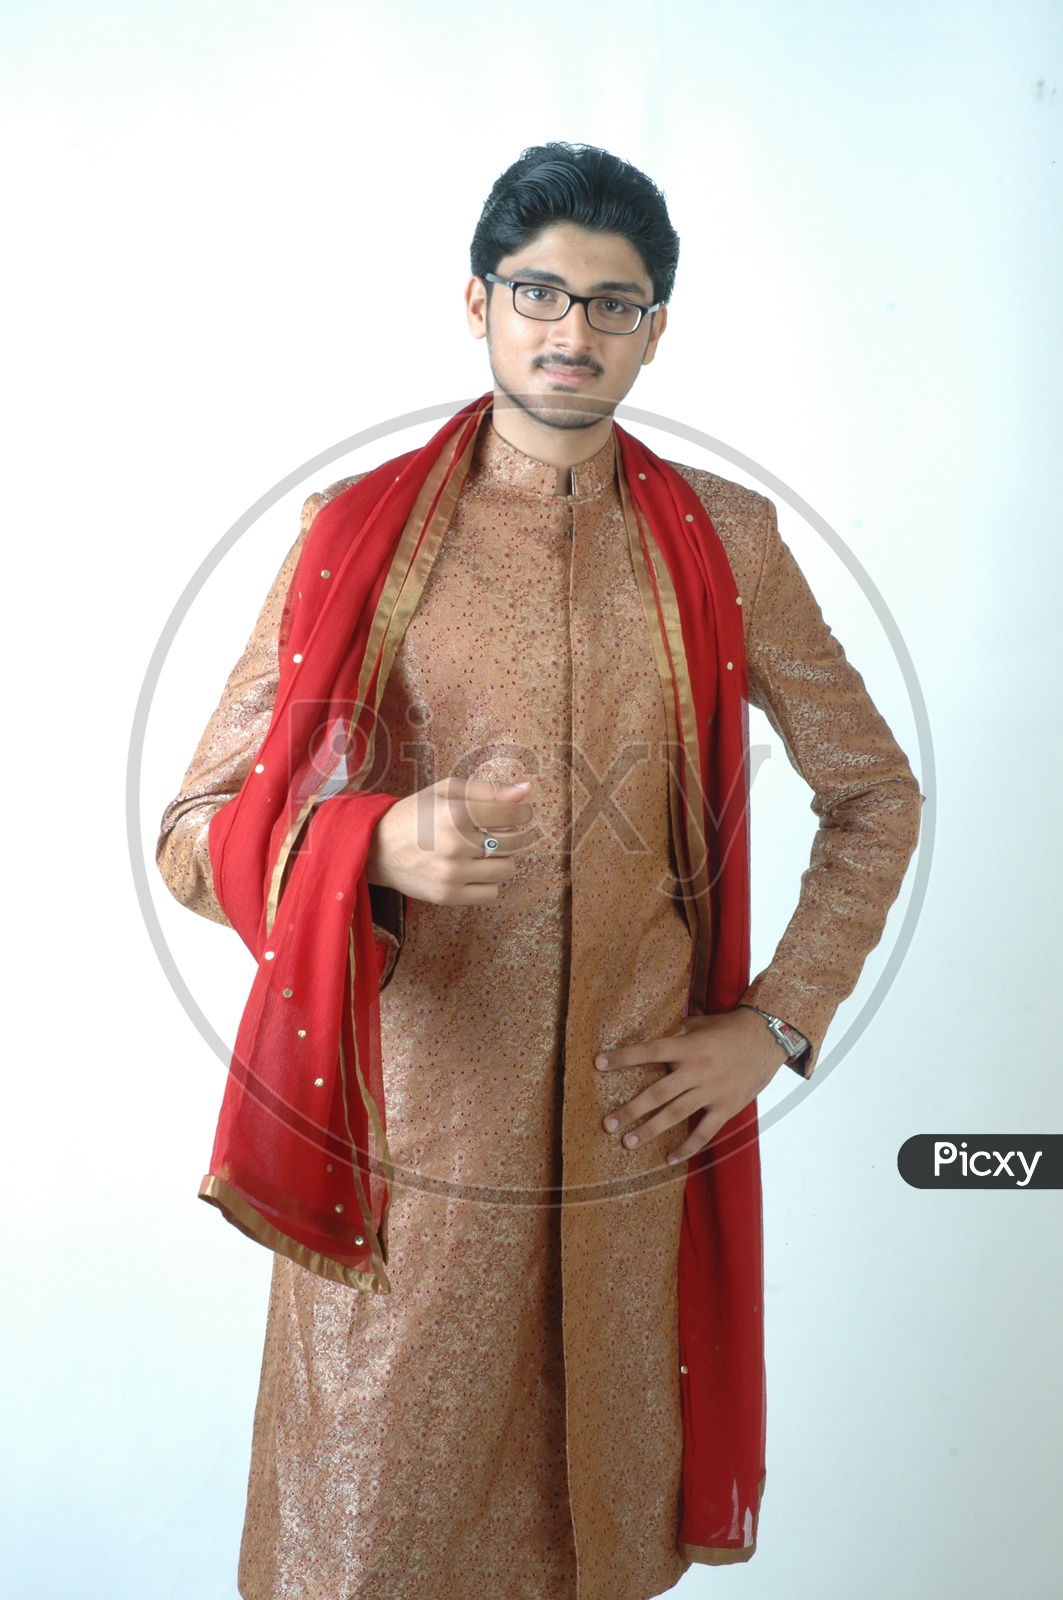 Indian men fashion Images - Search Images on Everypixel